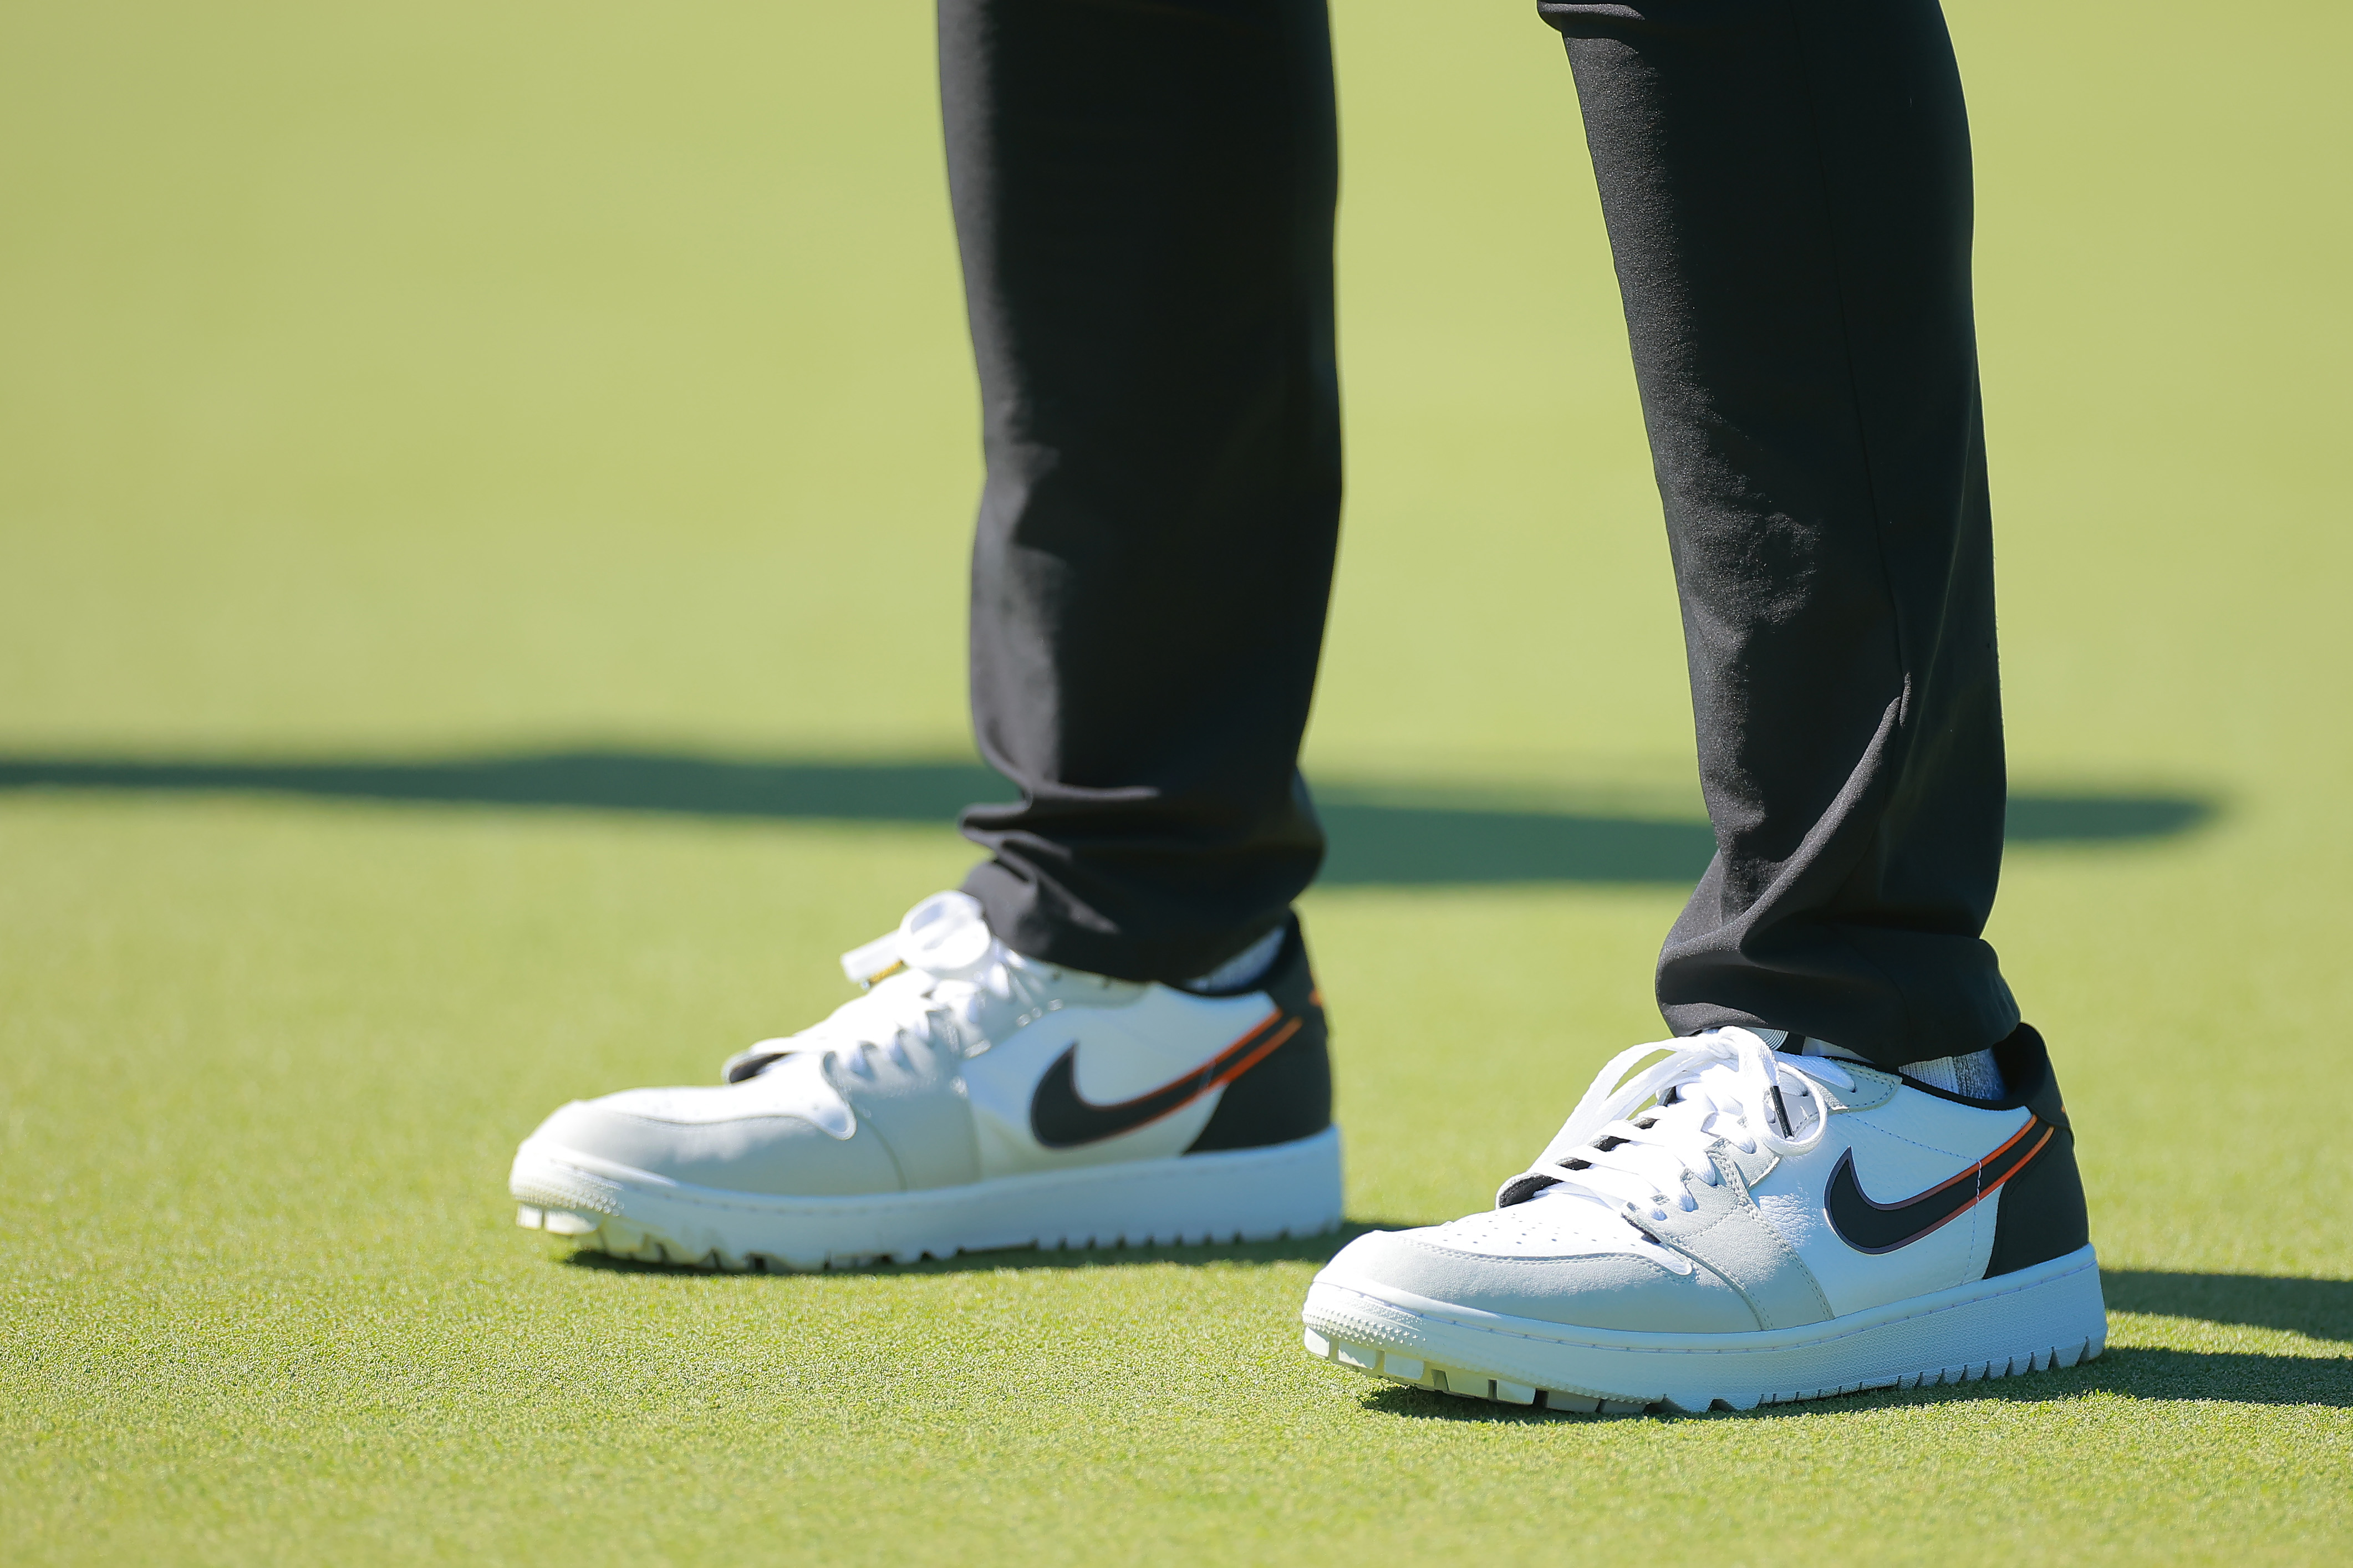 Are We Experiencing A Spiked Golf Shoe Renaissance? | Golf Monthly